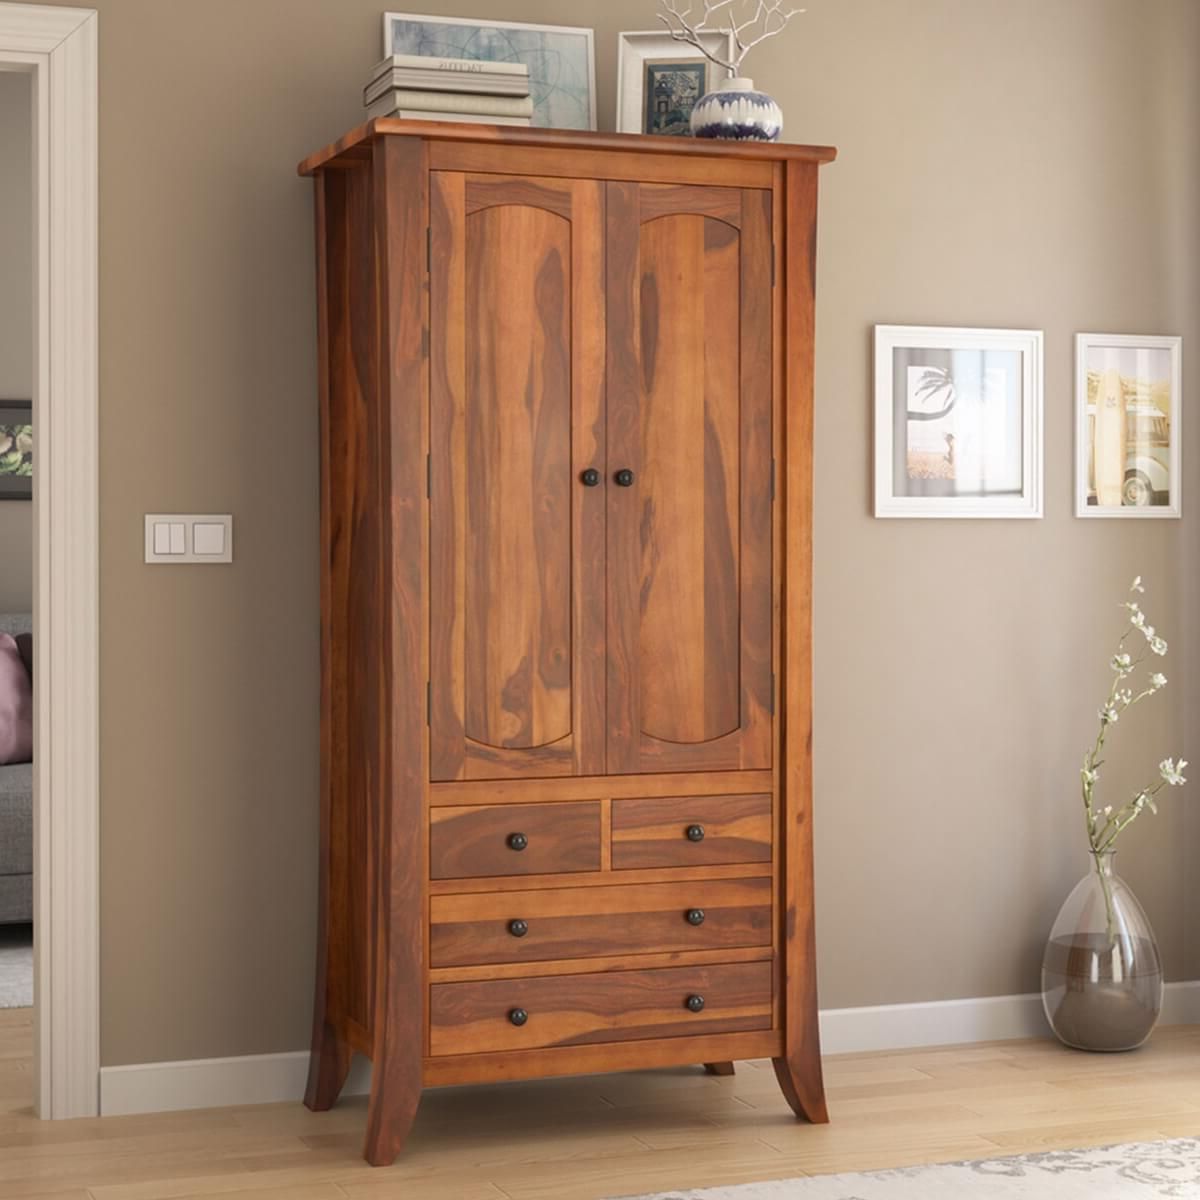 Breta Solid Wood Wardrobe In Natural Finish – Kalyanam Furniture With Regard To Solid Wood Wardrobes Closets (View 2 of 20)